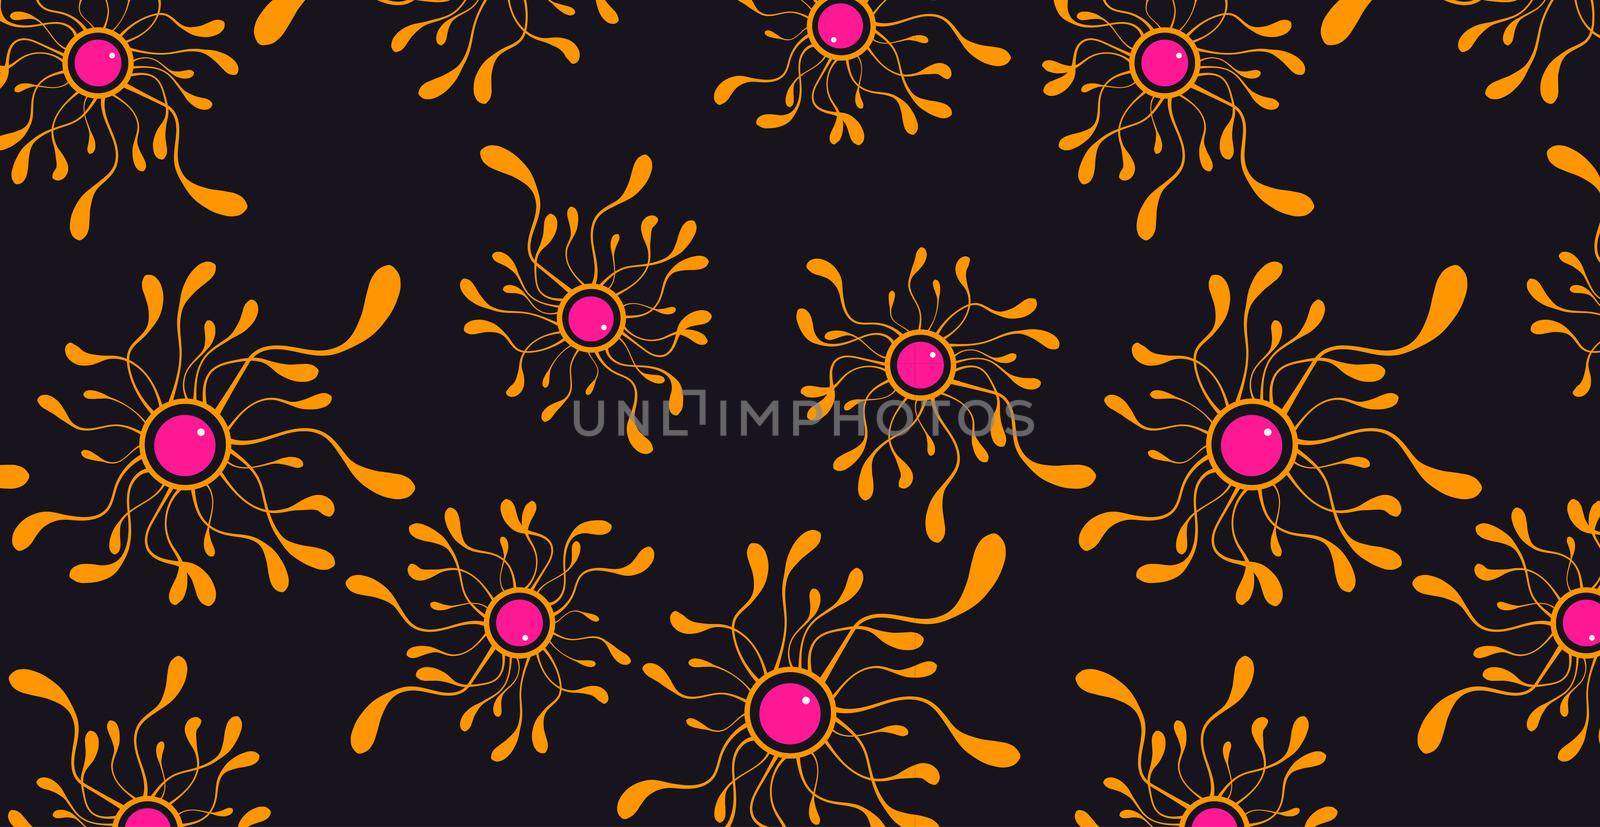 Abstract psychedelic background. Textured background with geometric shapes in the form of tentacles. Can be used for fabric, background, wrapping paper, digital paper.